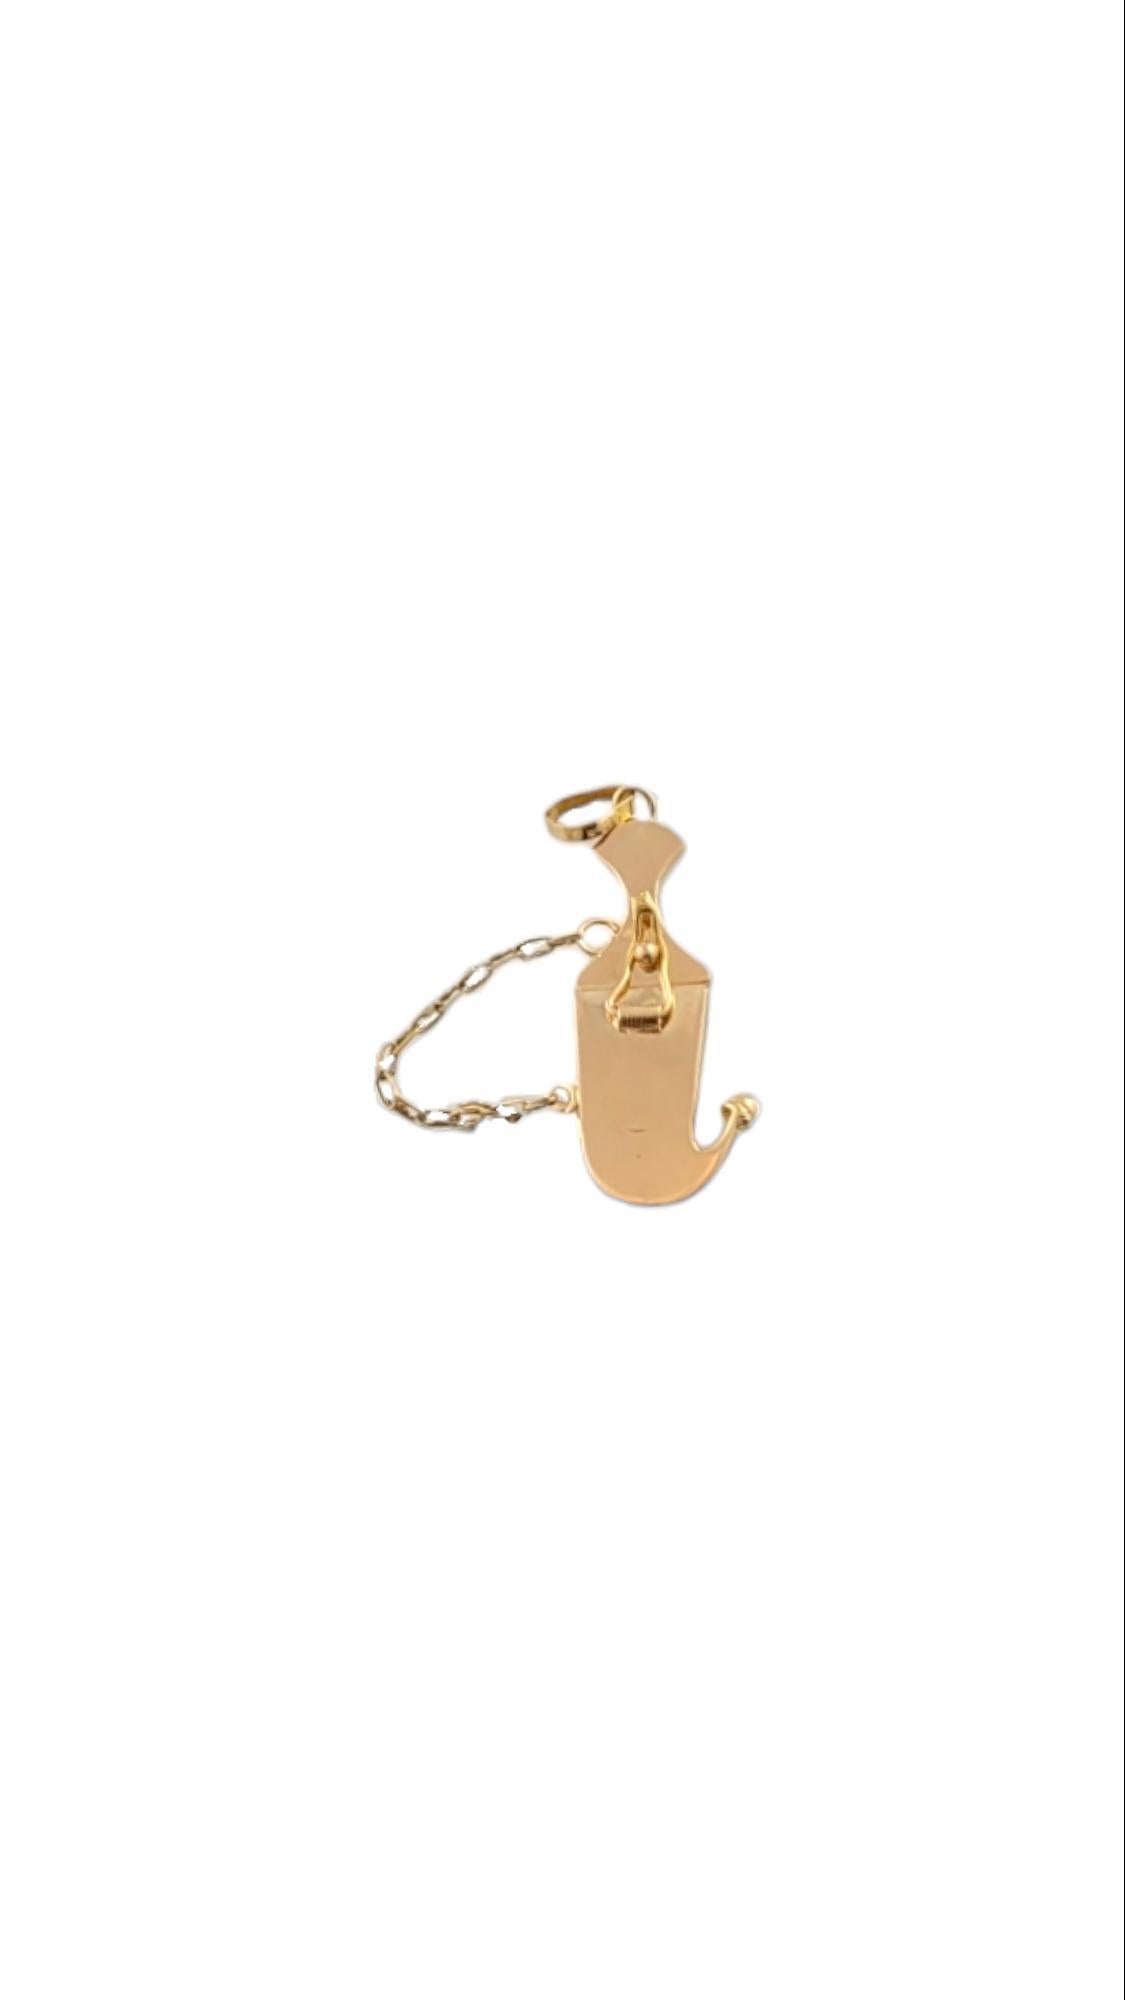 Vintage 21K Yellow Gold Dagger Charm-

This lovely dagger features a filigree case crafted in beautifully detailed 21K yellow gold. 

Size: 29.5mm X 13.3mm 

Stamped: 21K 

Weight: 2.6g/1.6dwt

Very good condition, professionally polished.

Will